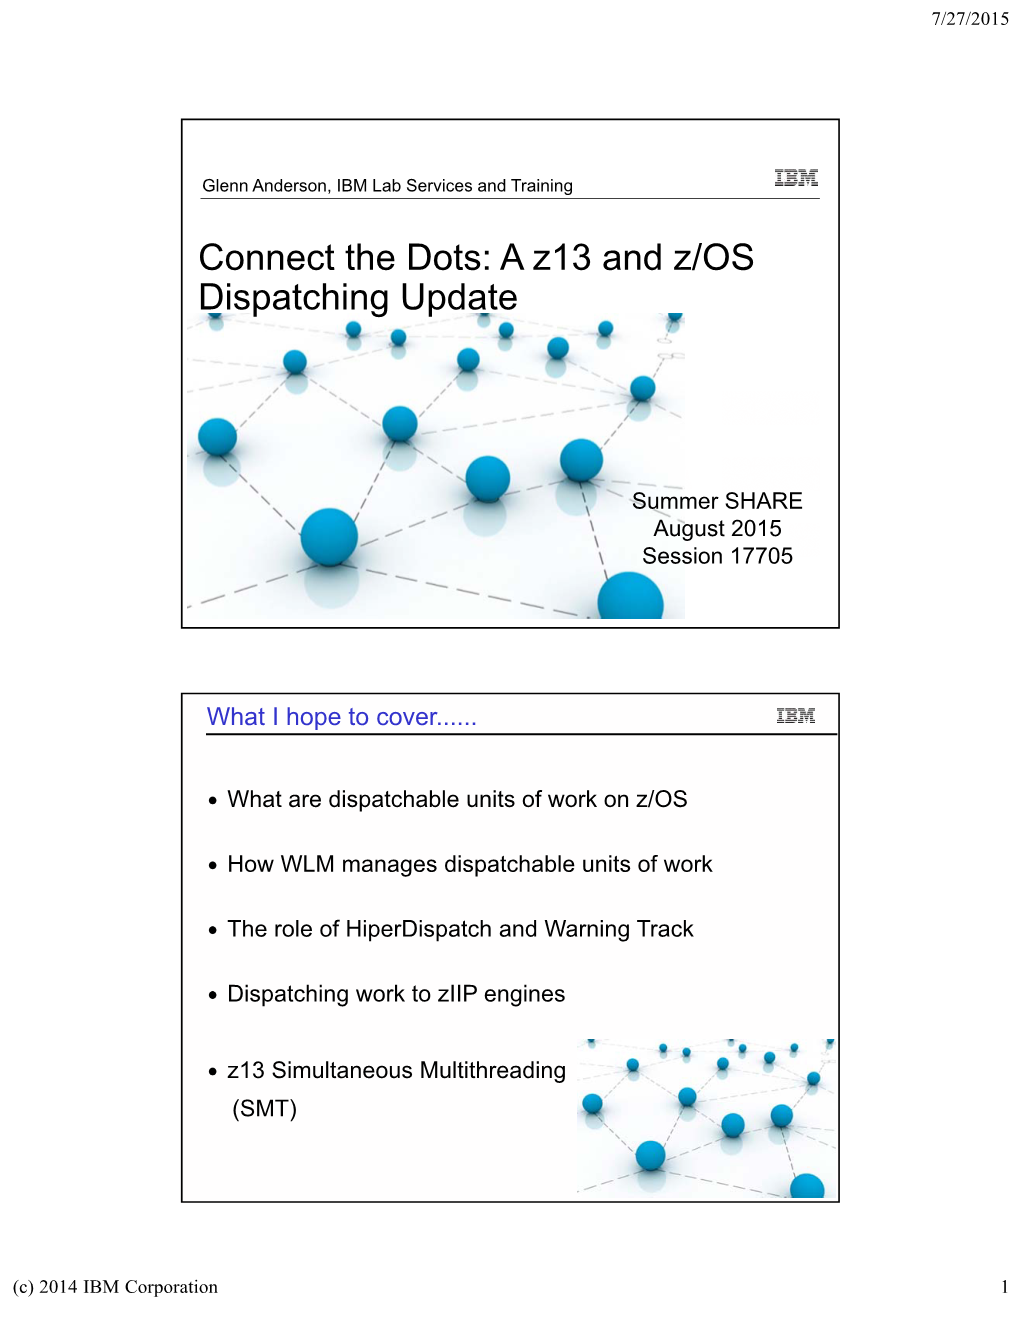 Connect the Dots: a Z13 and Z/OS Dispatching Update